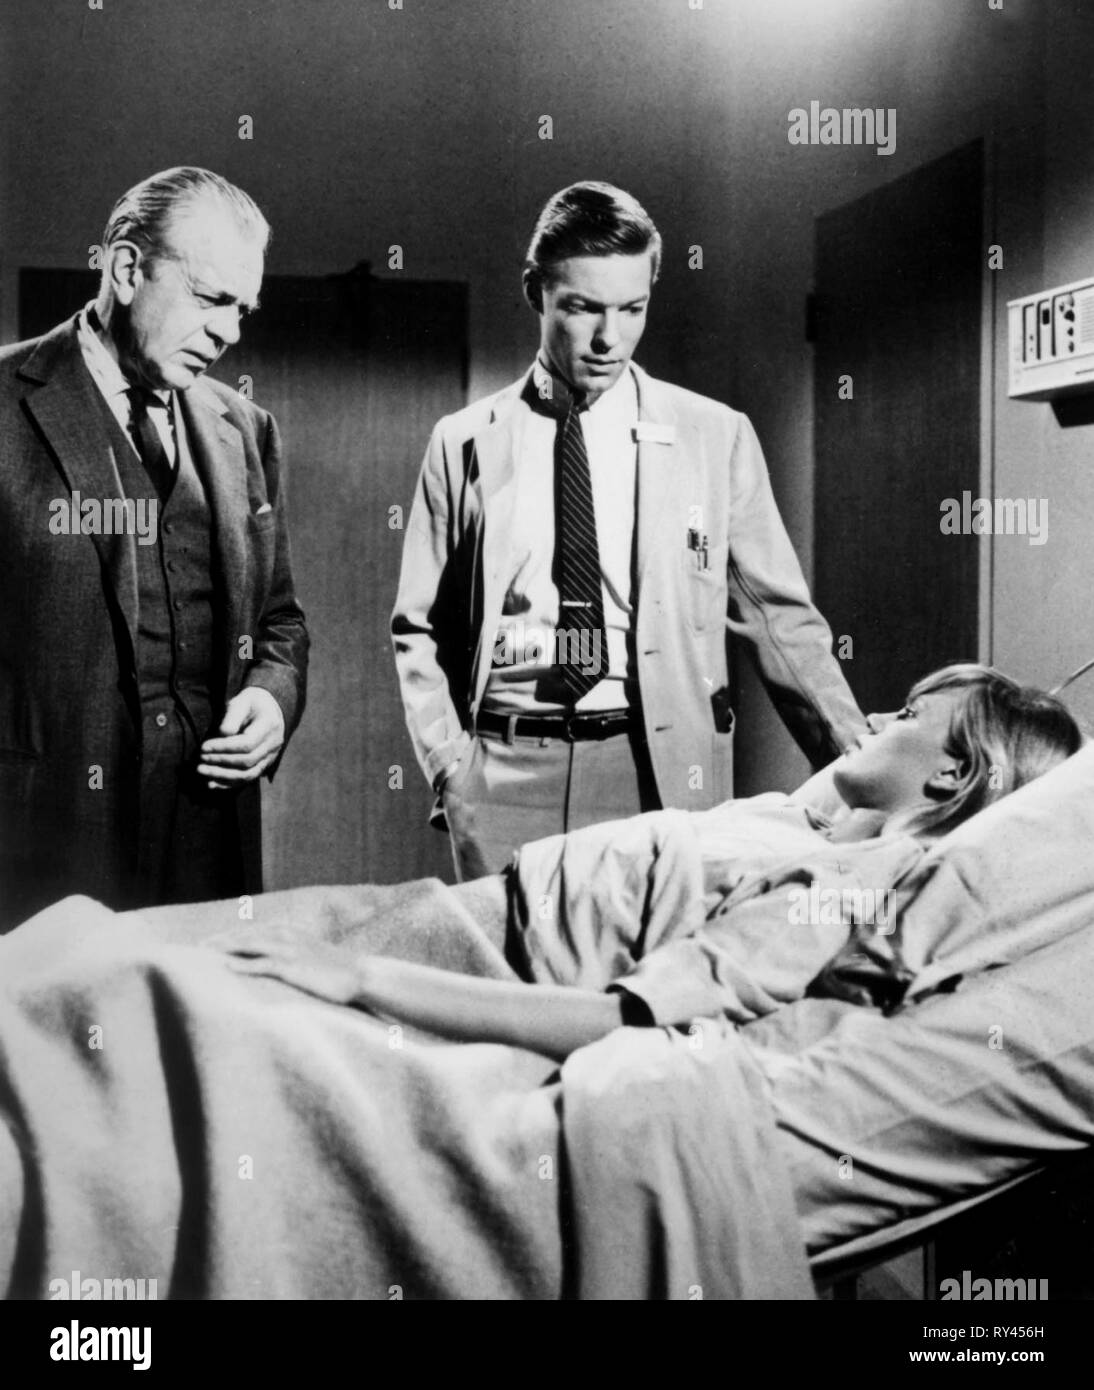 CHAMBERLAIN,MASSEY, DR. KILDARE, 1969 Banque D'Images